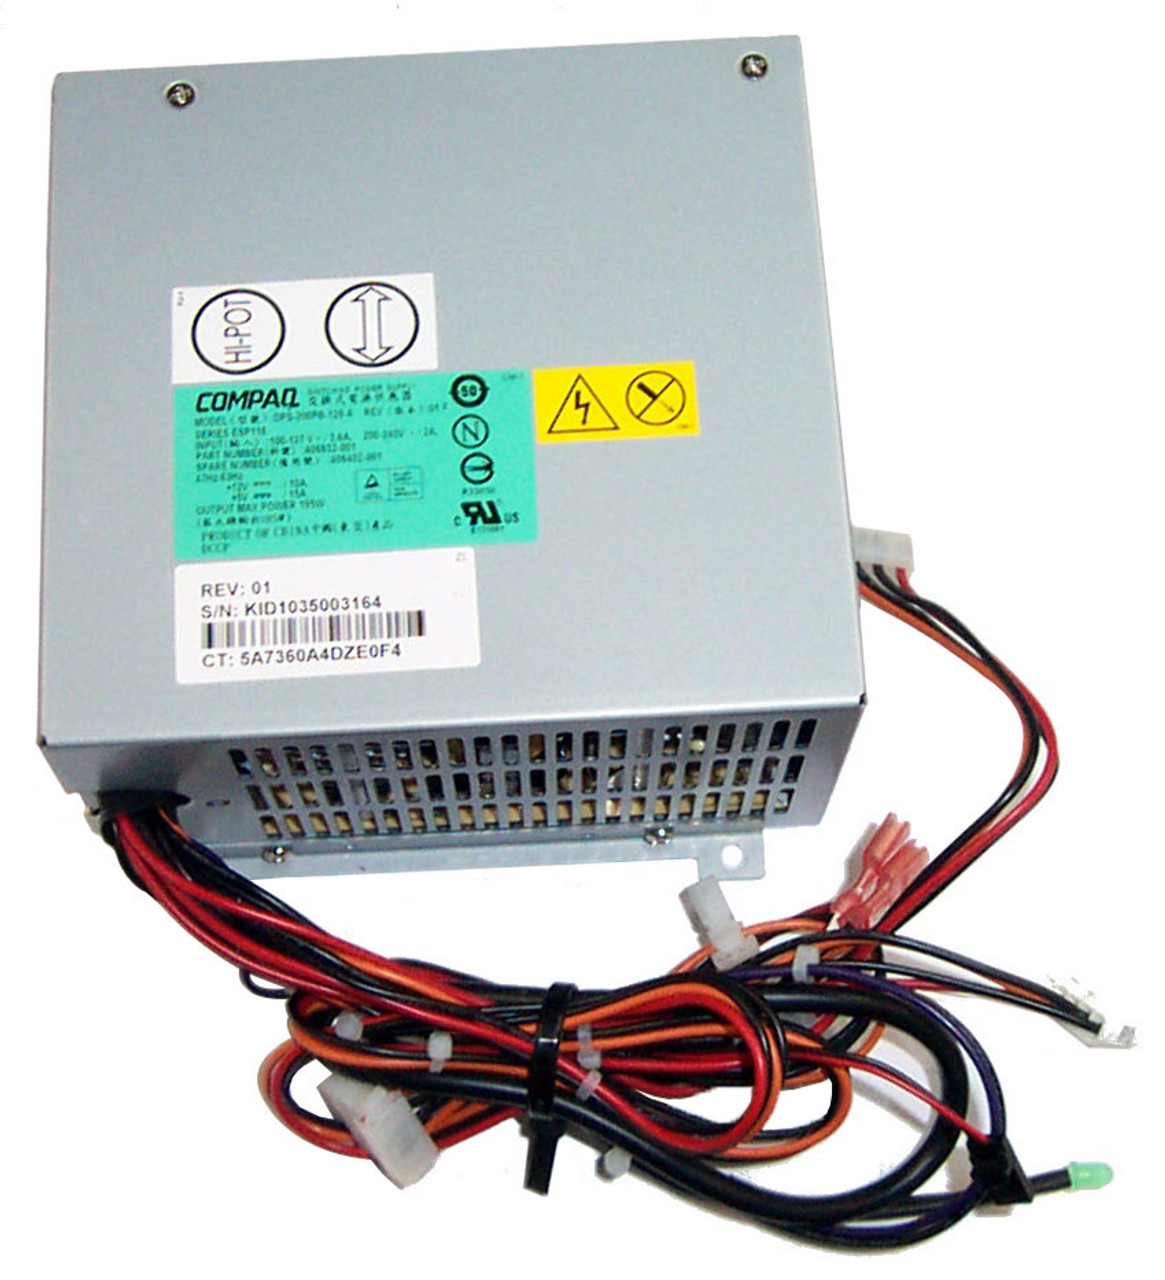 DPS-200PB-139A HP 200-Watts ATX AC Power Supply with Active PFC